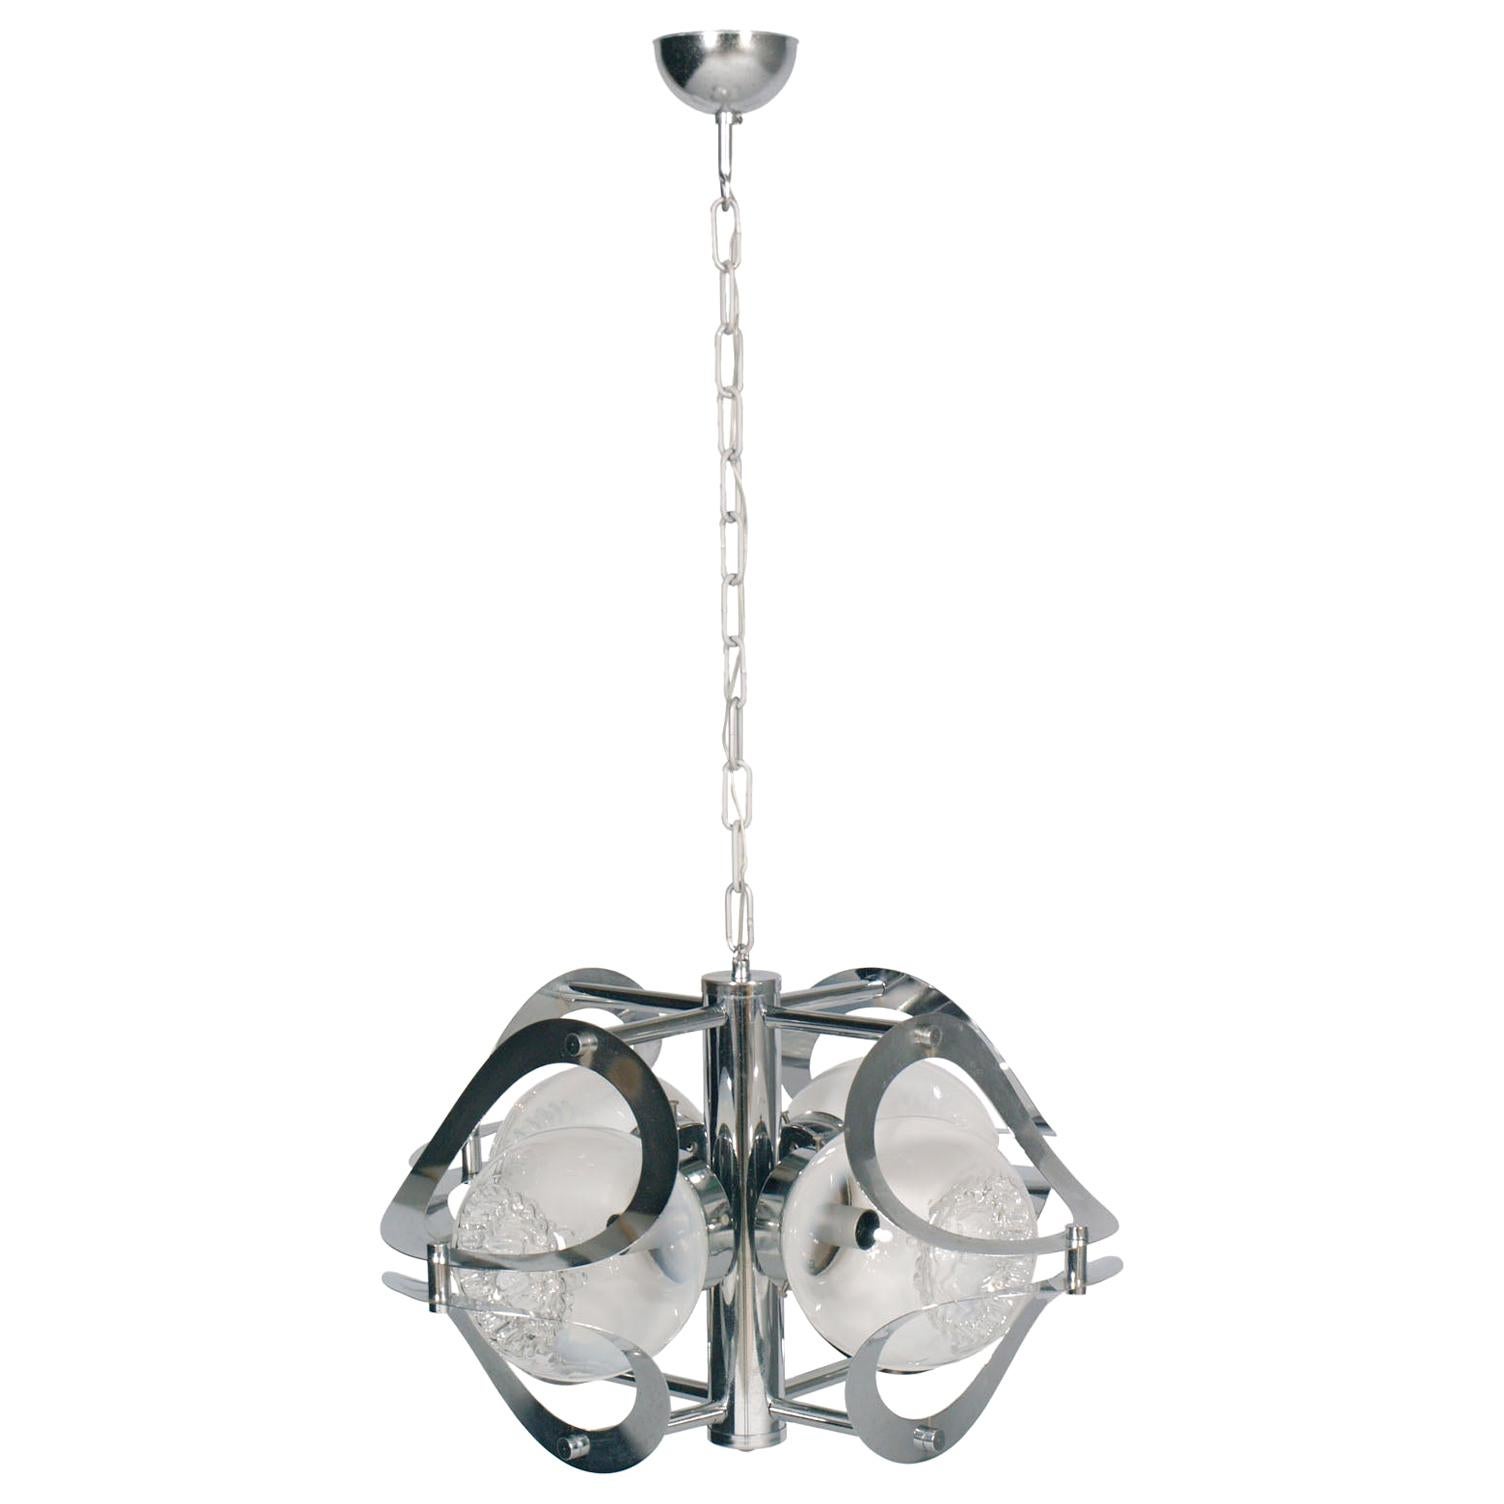 Space Age Mazzega Chandelier in Chromed Steel and Murano Glass, 4-Light